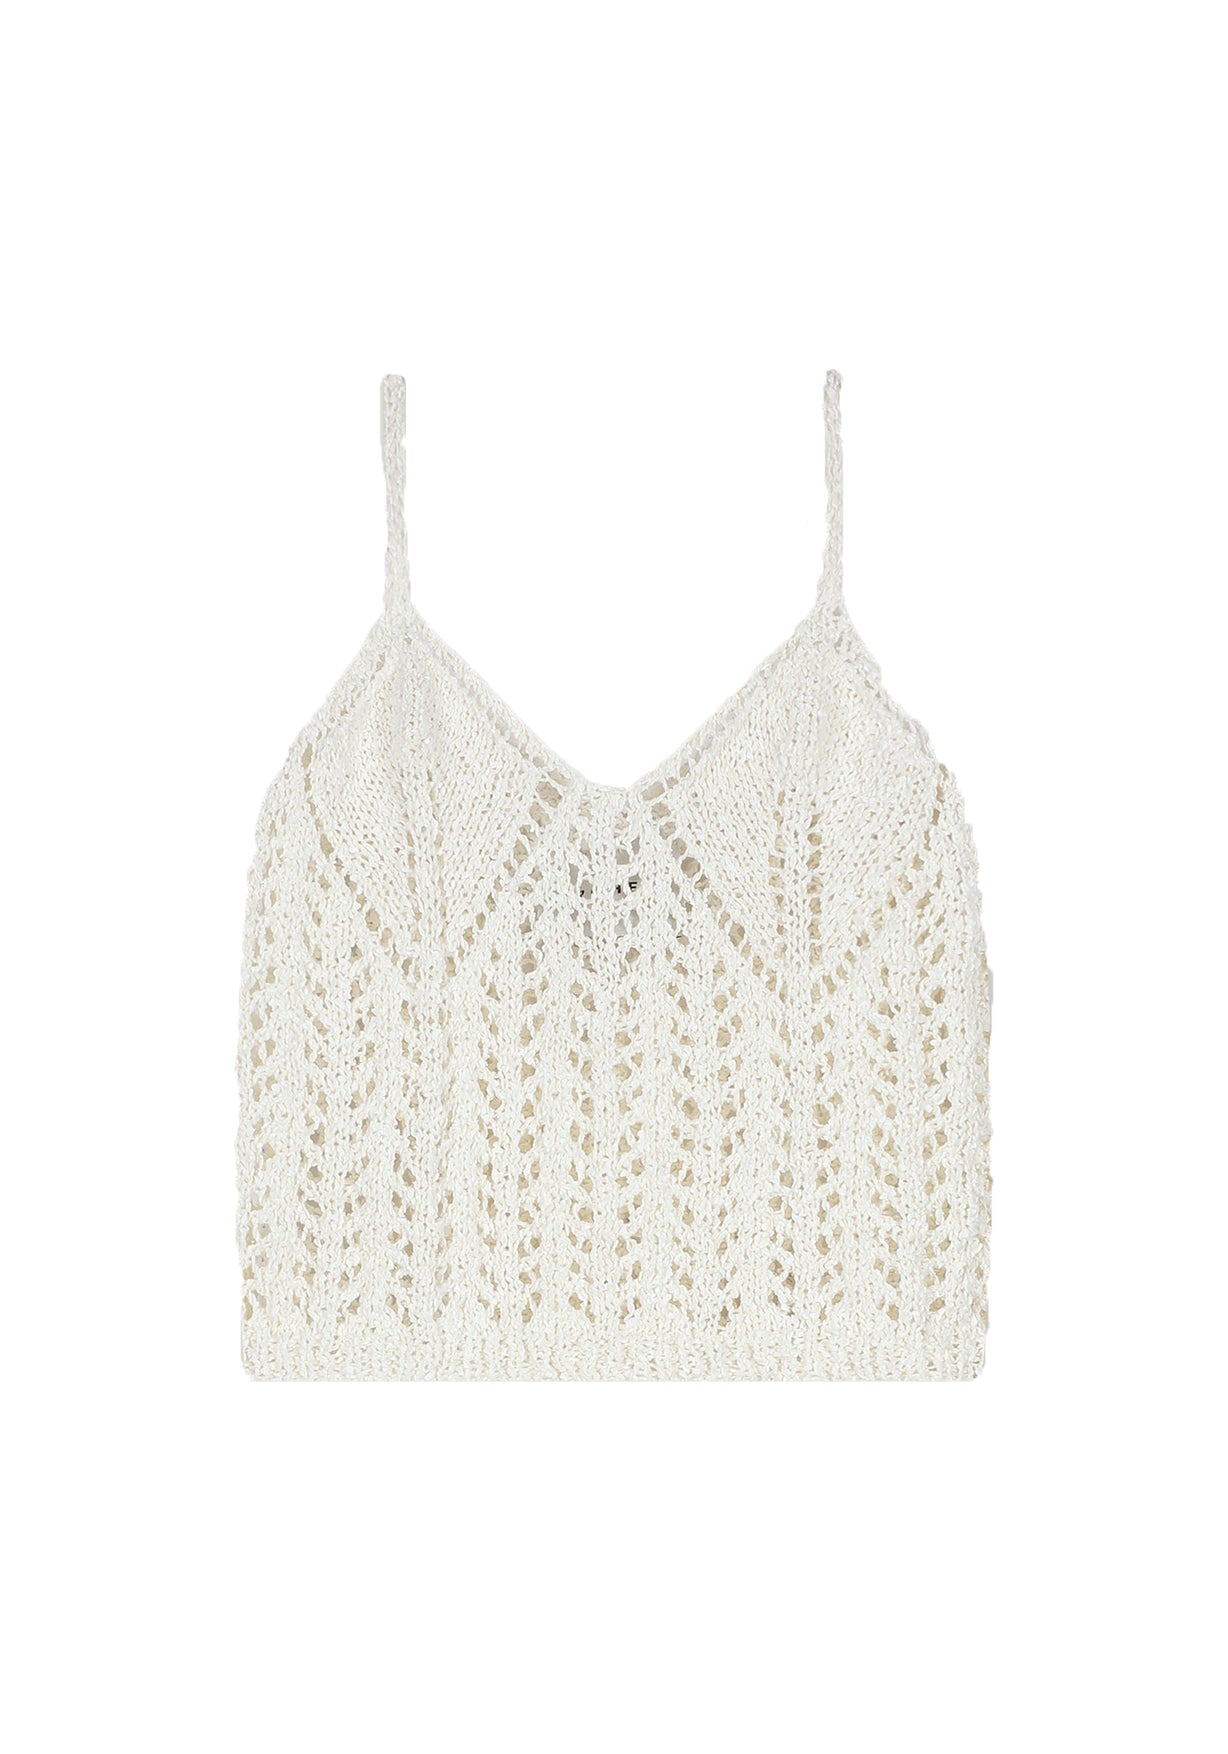 Resort-style knitted tank pullover off-white